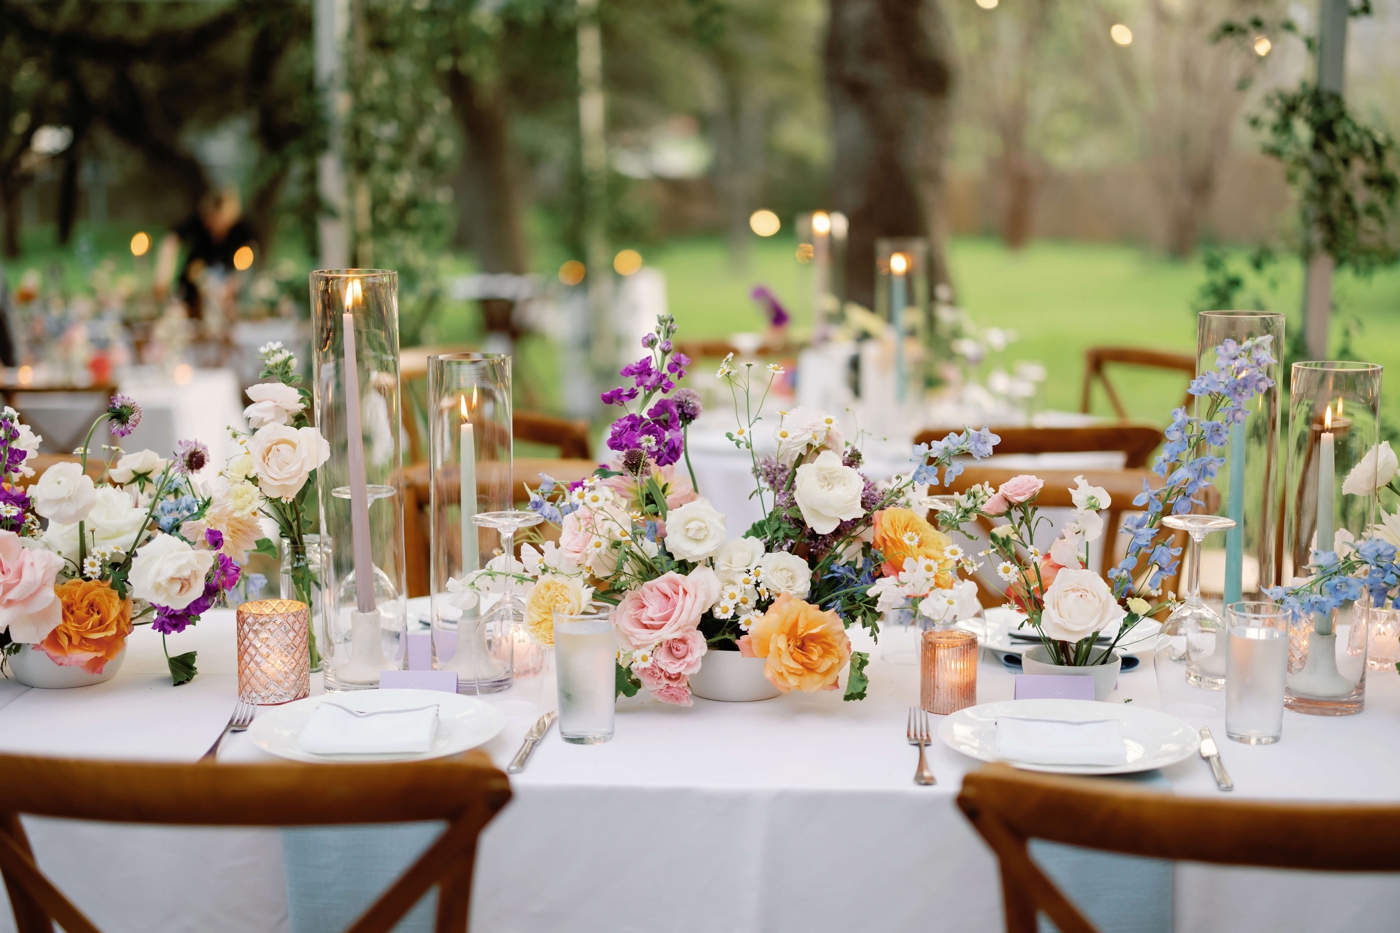 Pastel and ombre flower centerpieces at long tables under a clear tent